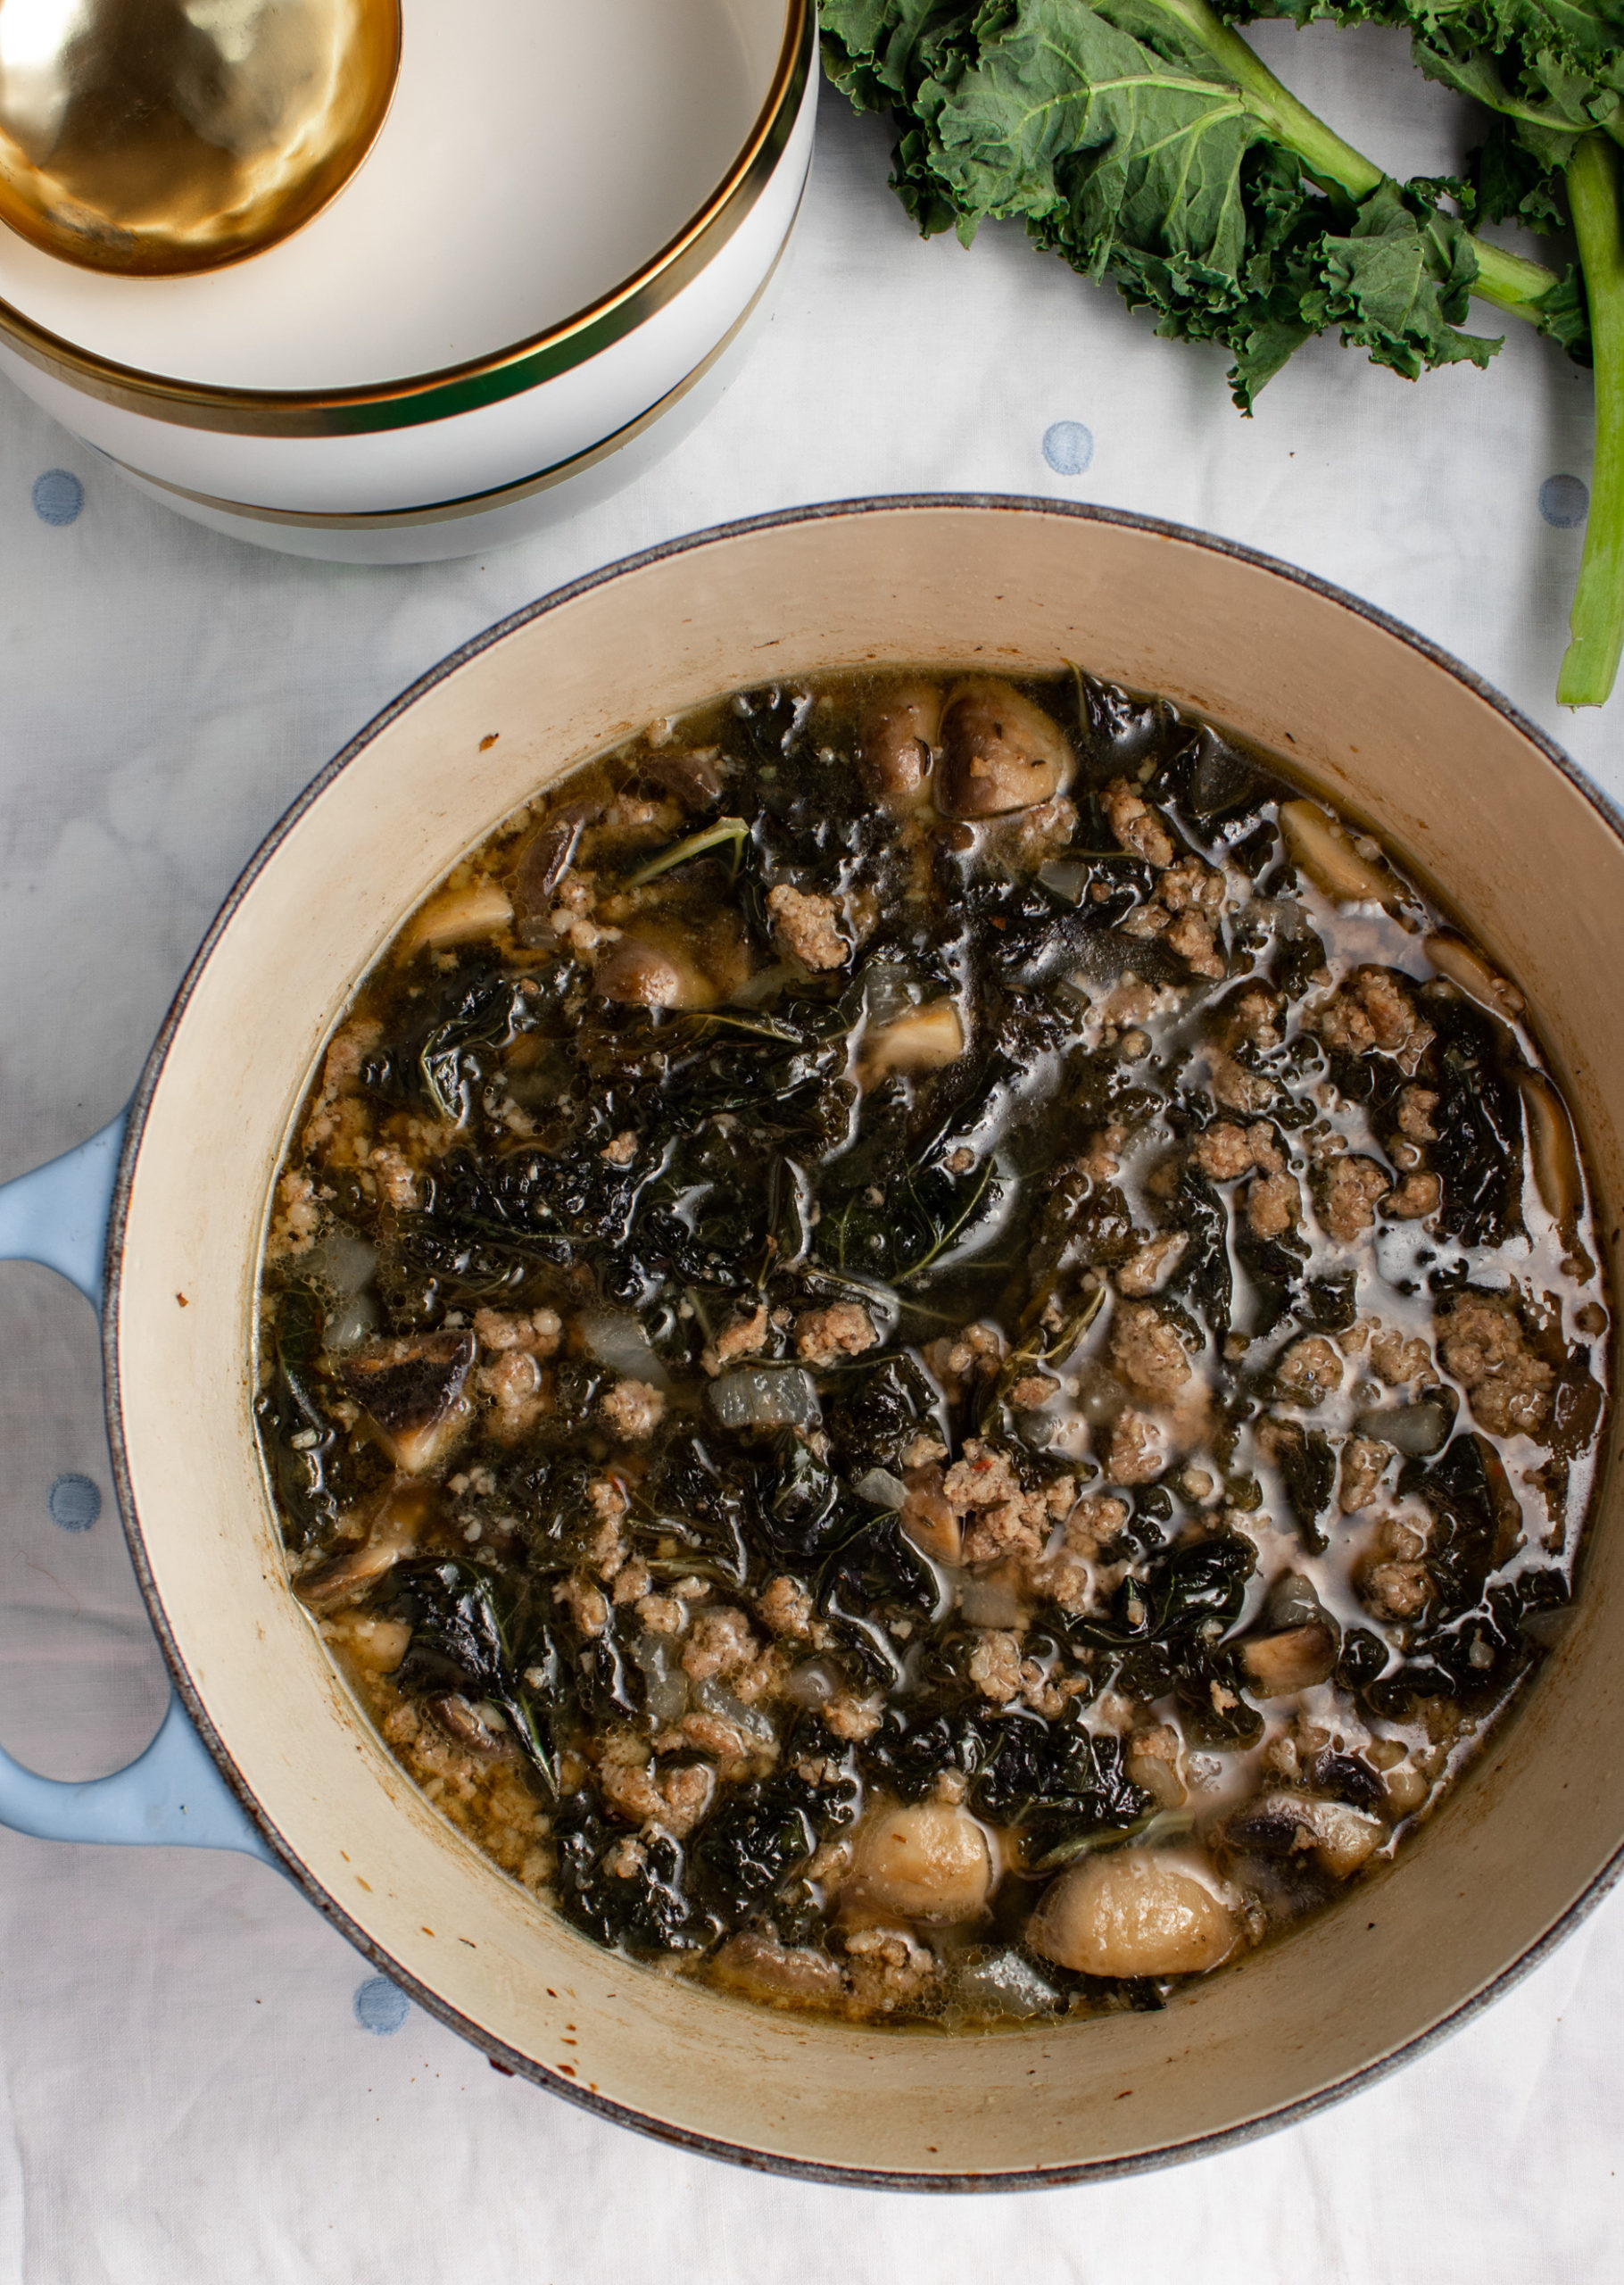 Ready in just 30 minutes on the stovetop, kale and sausage soup is a savory and herbal soup lovely for lunches, meal prep, or to carry to a friend. You're going to love this gluten free, low carb, and clean sausage and kale soup!